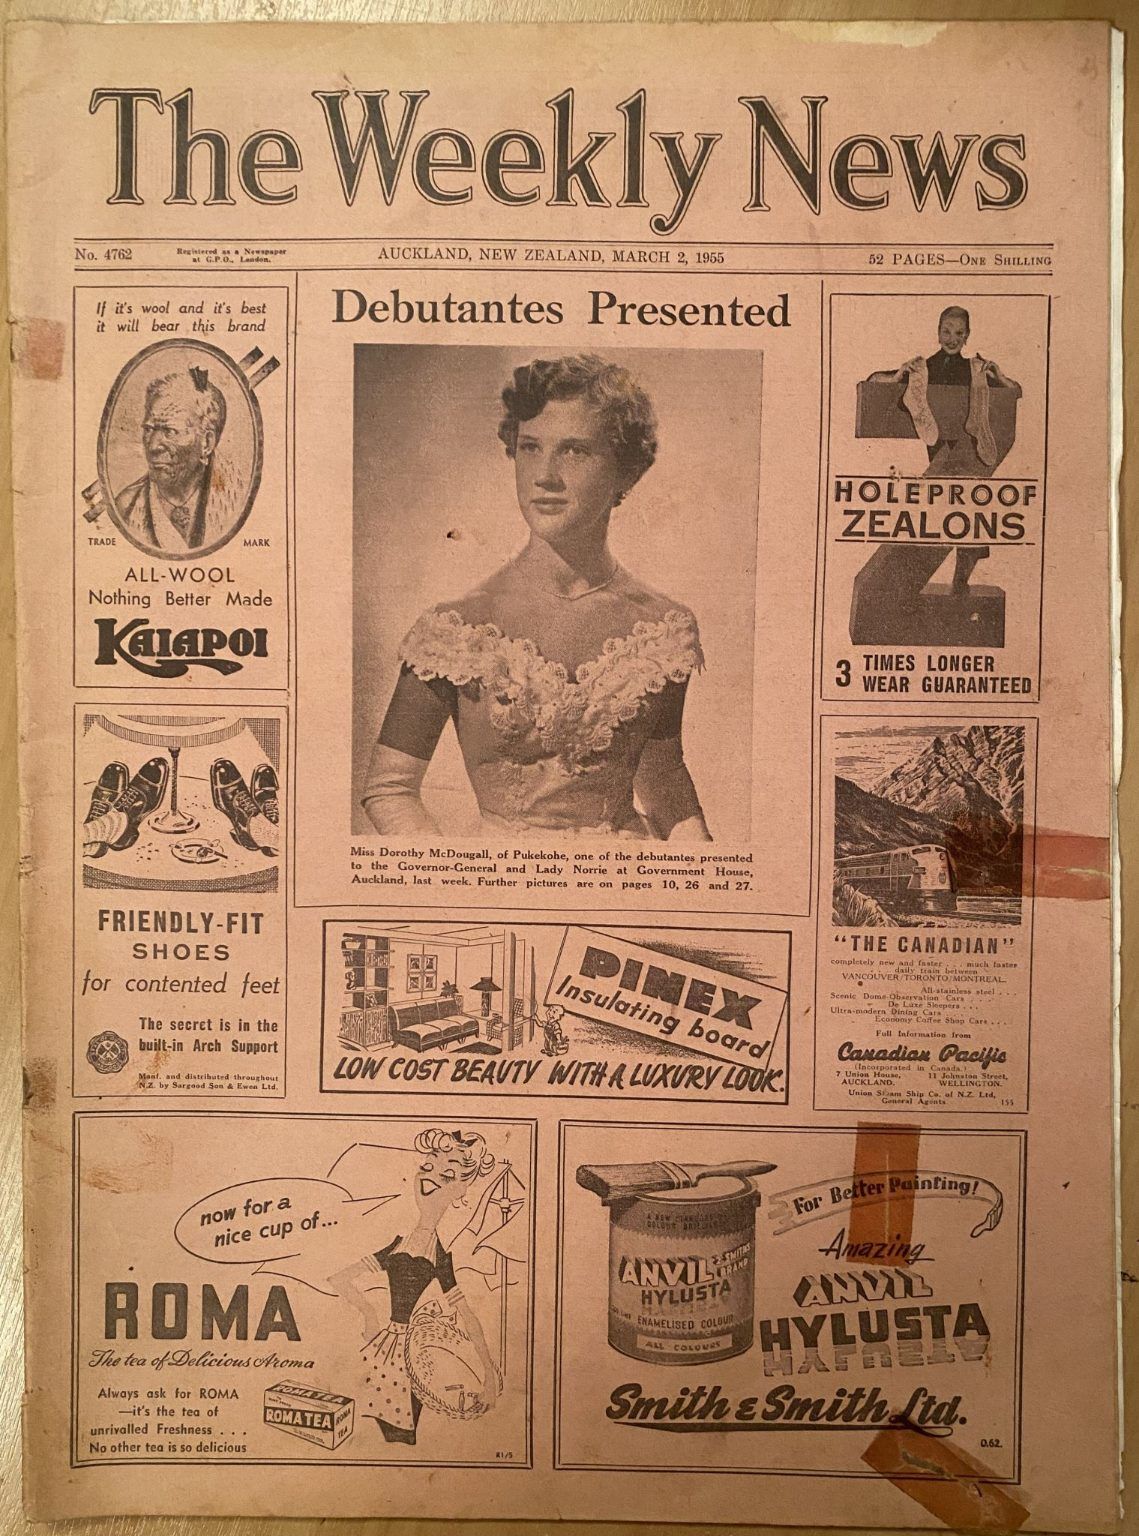 OLD NEWSPAPER: The Weekly News - No. 4762, 2 March 1955